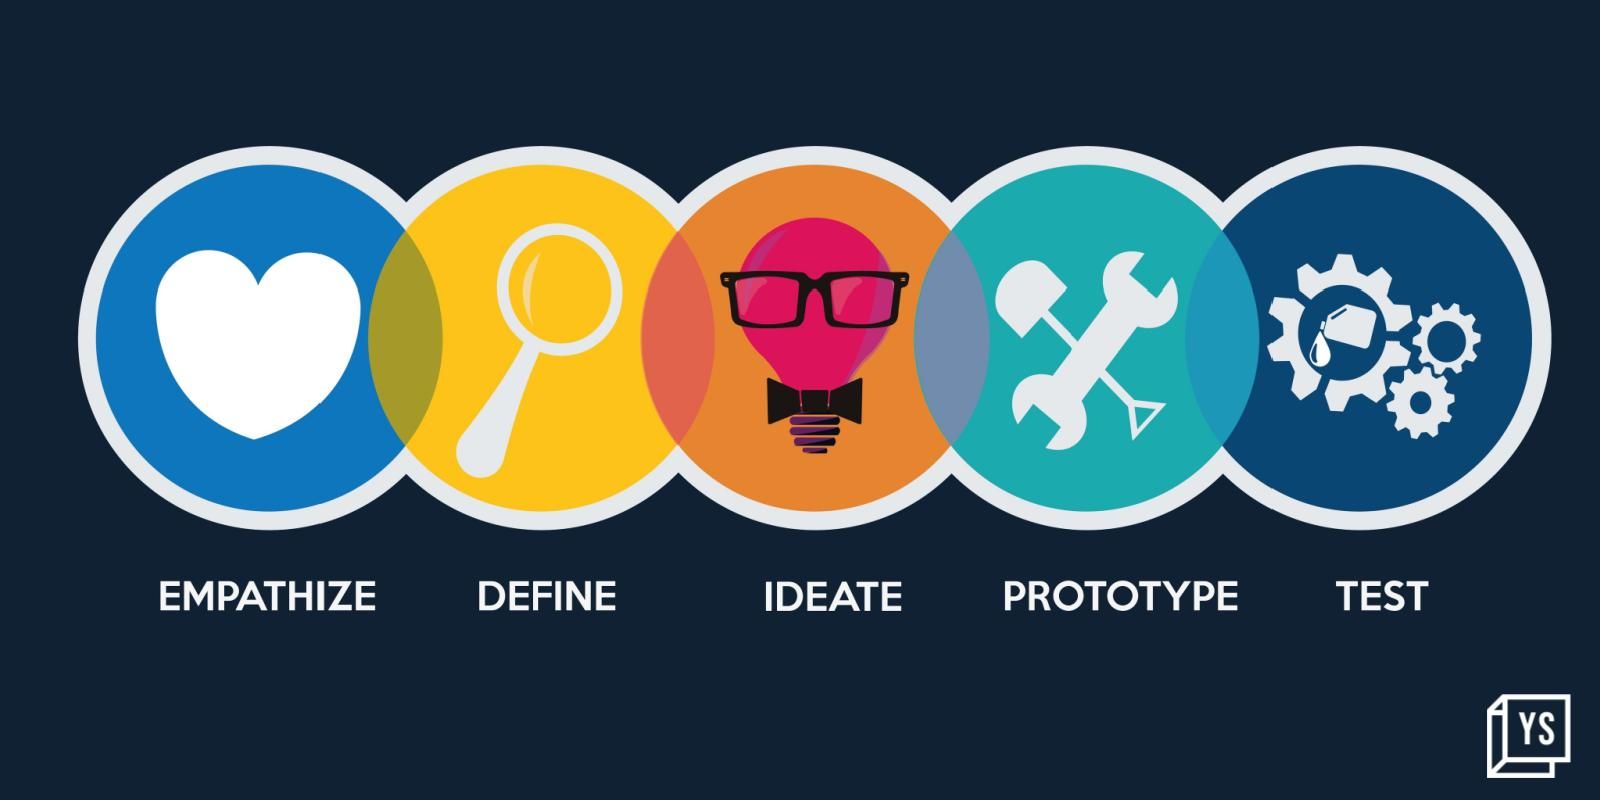 Design thinking can play an important role in creating digital leaders 